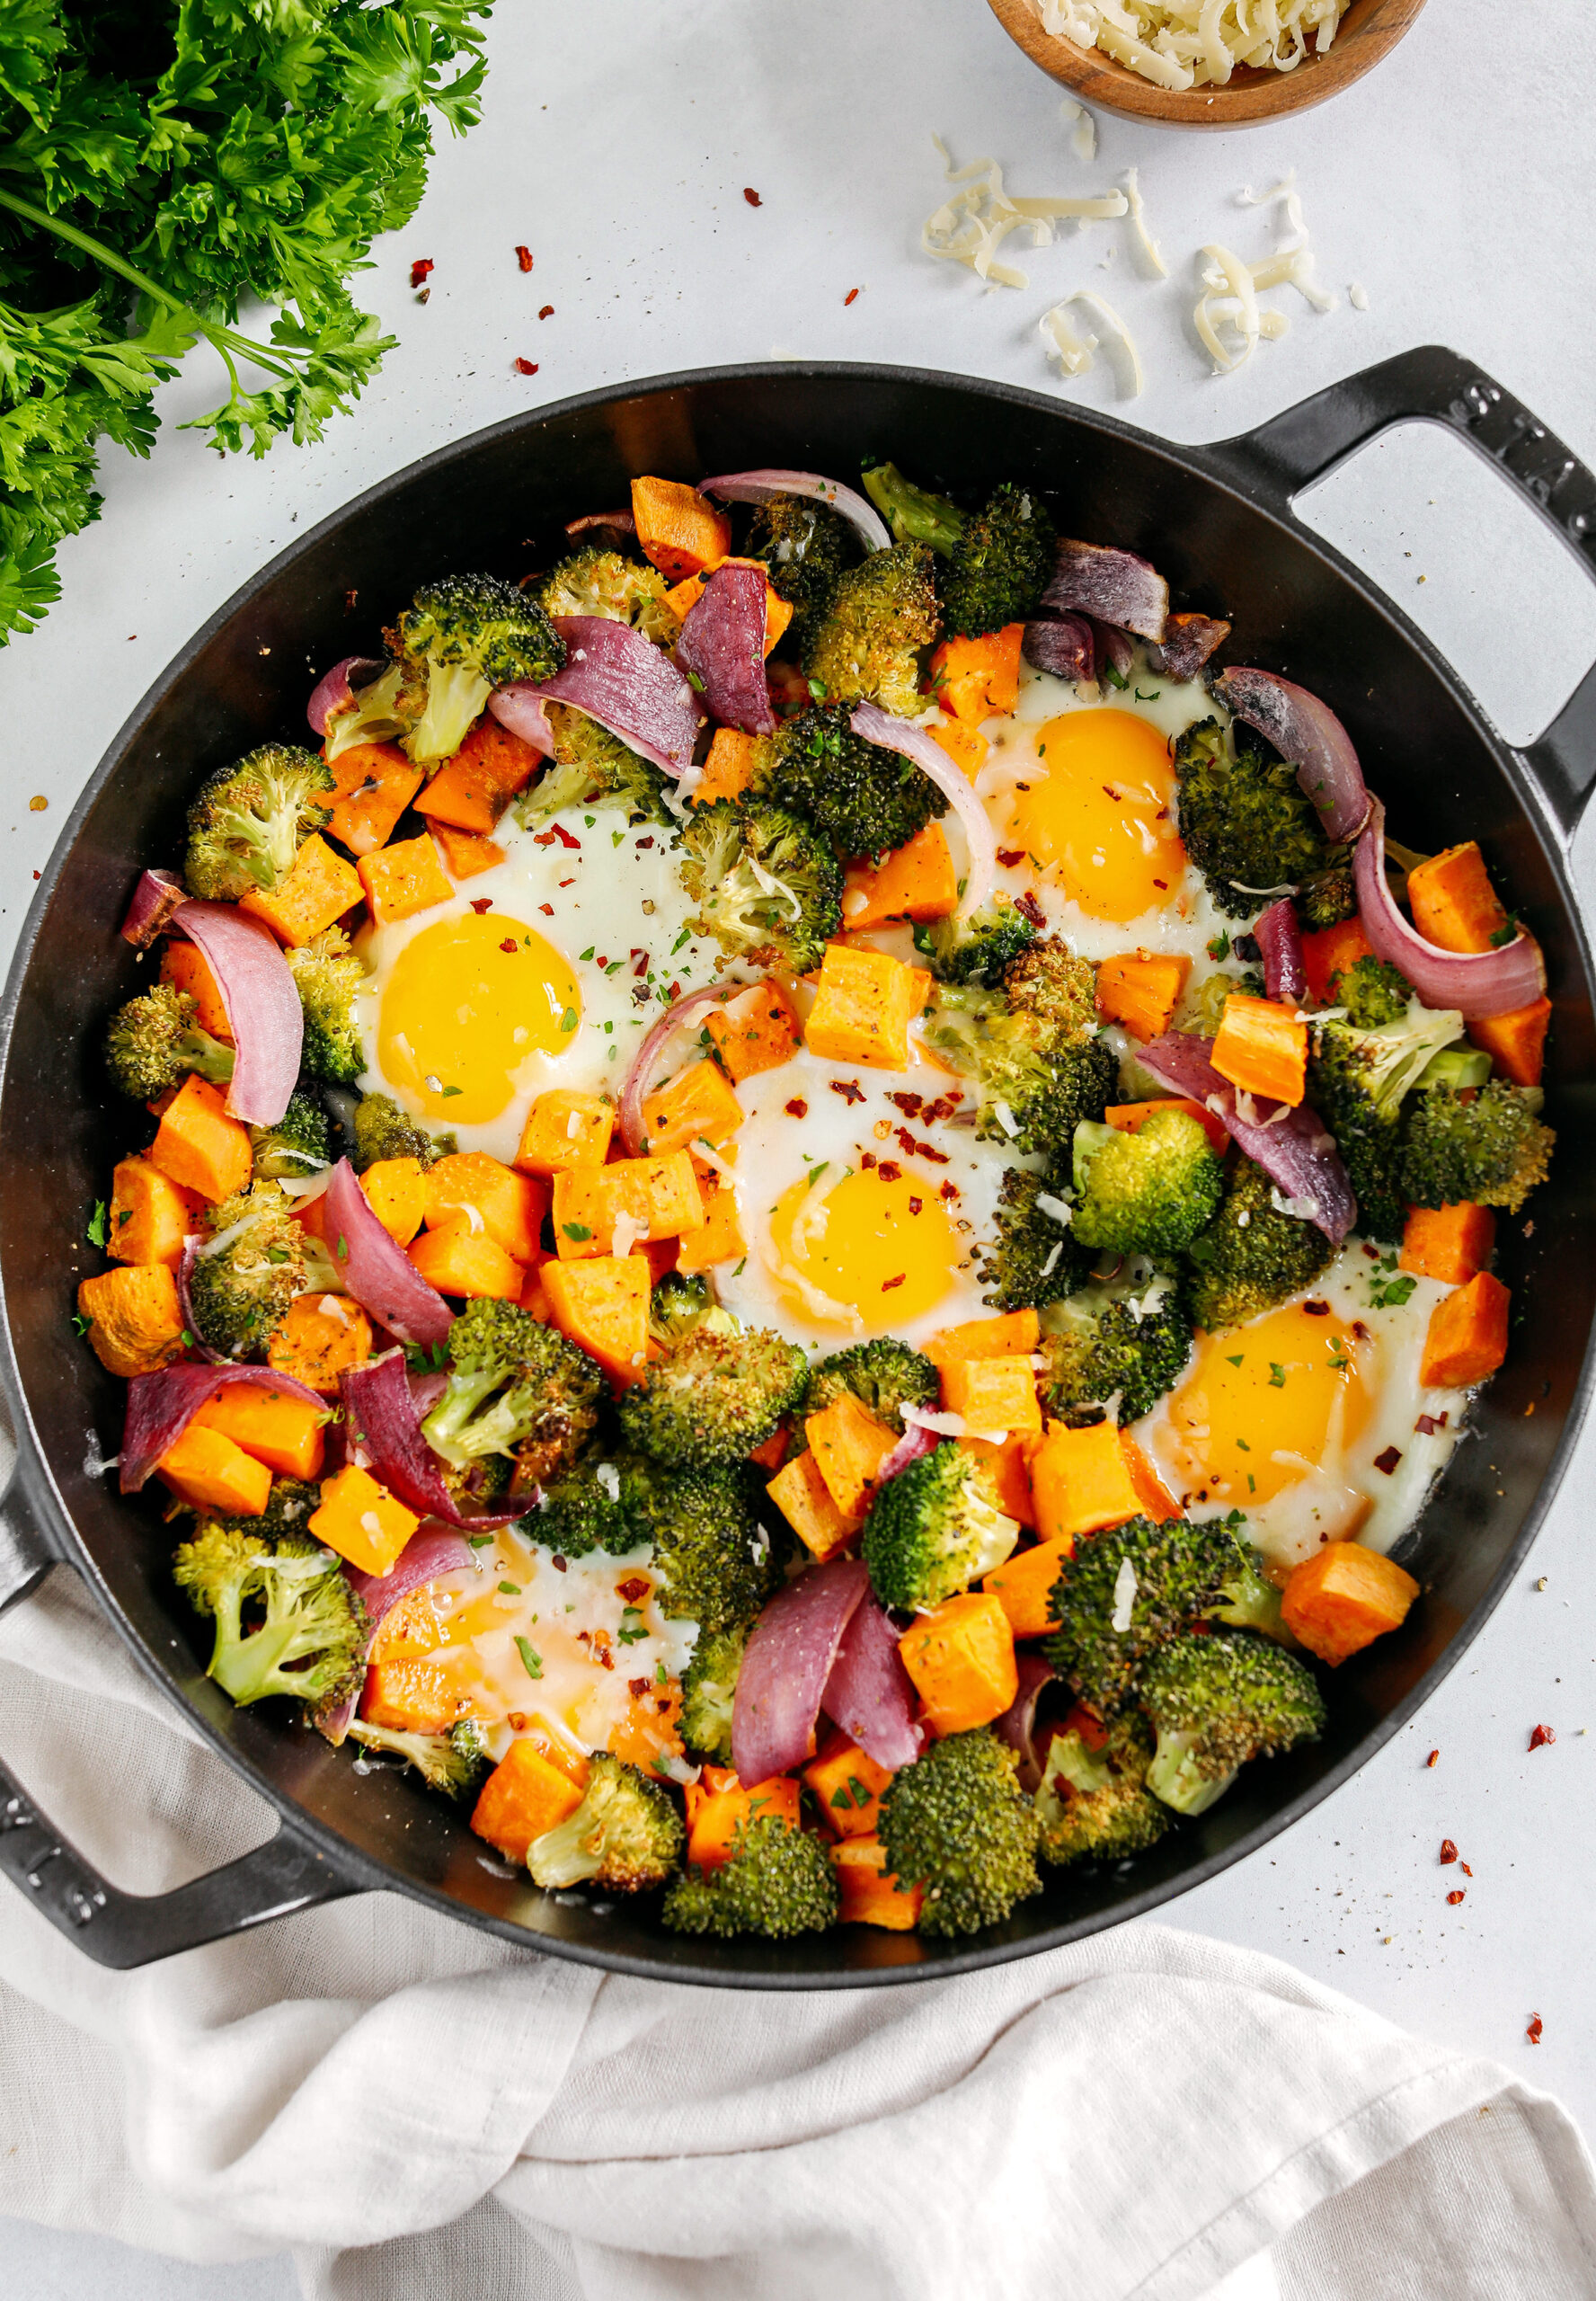 Roasted Veggie Breakfast Skillet made all in one pan with a hearty combination of sweet potatoes, broccoli and red onion topped with baked eggs and seasoned to perfection for a healthy delicious breakfast or dinner!